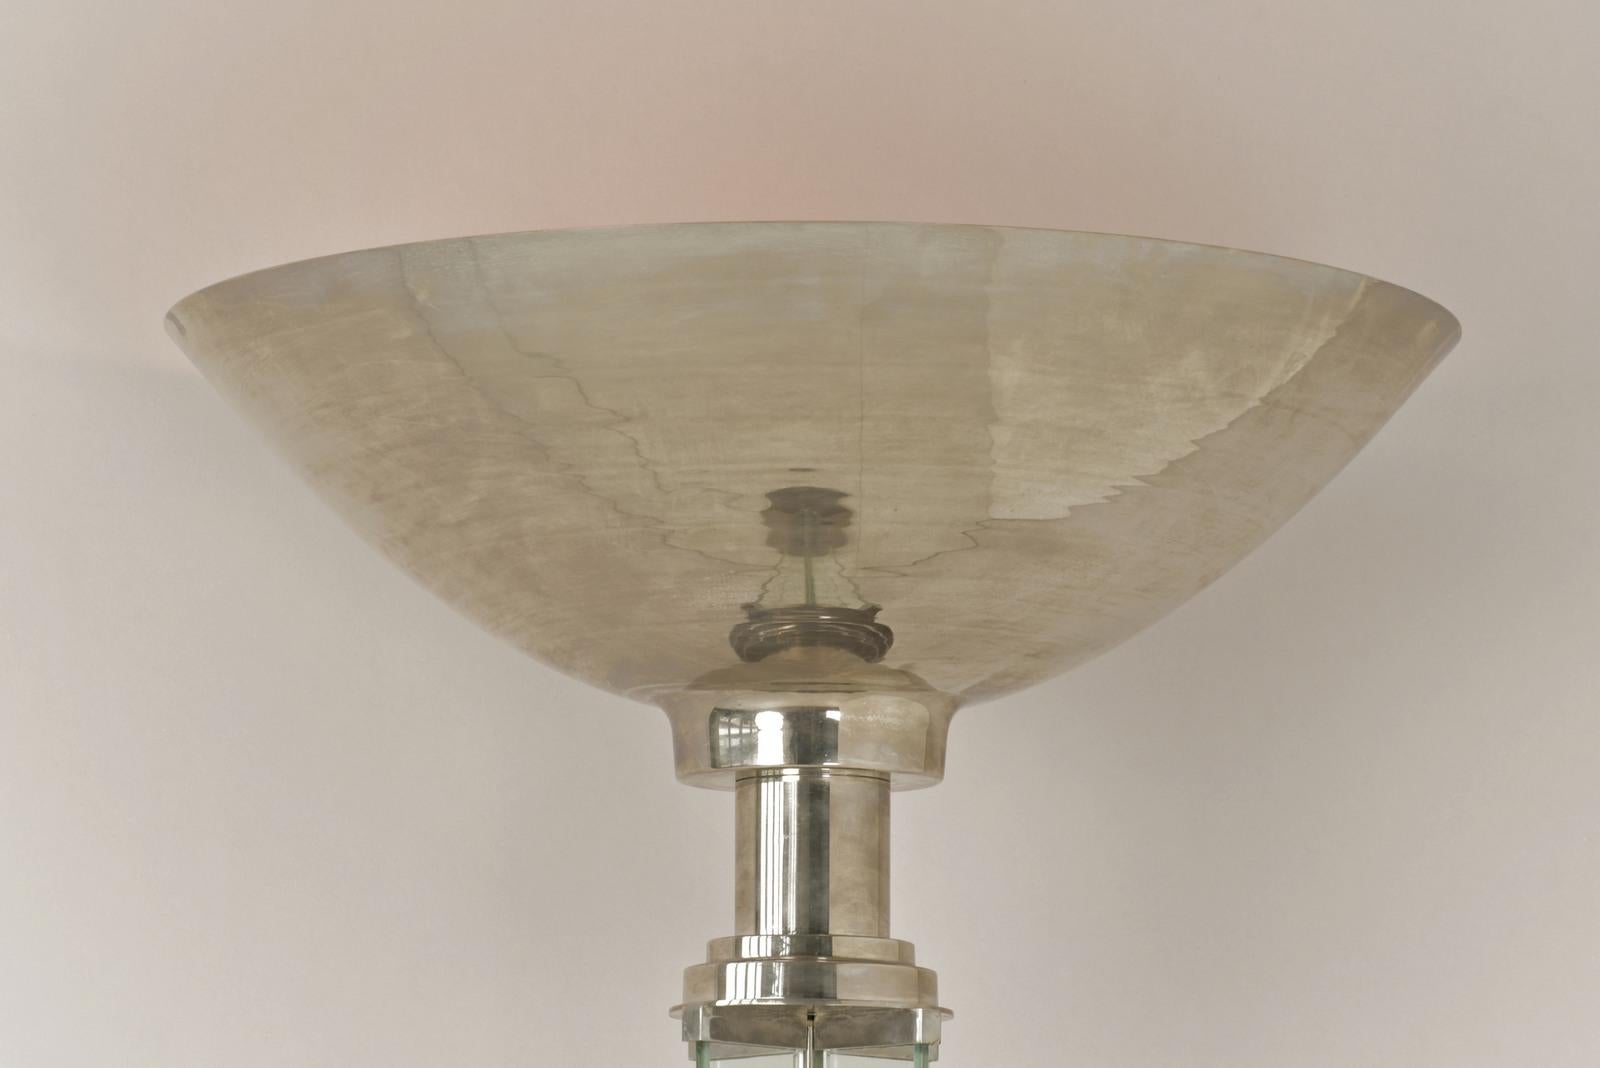 Art Deco Metal and Glass Floor Lamp, France - 1940s  For Sale 2